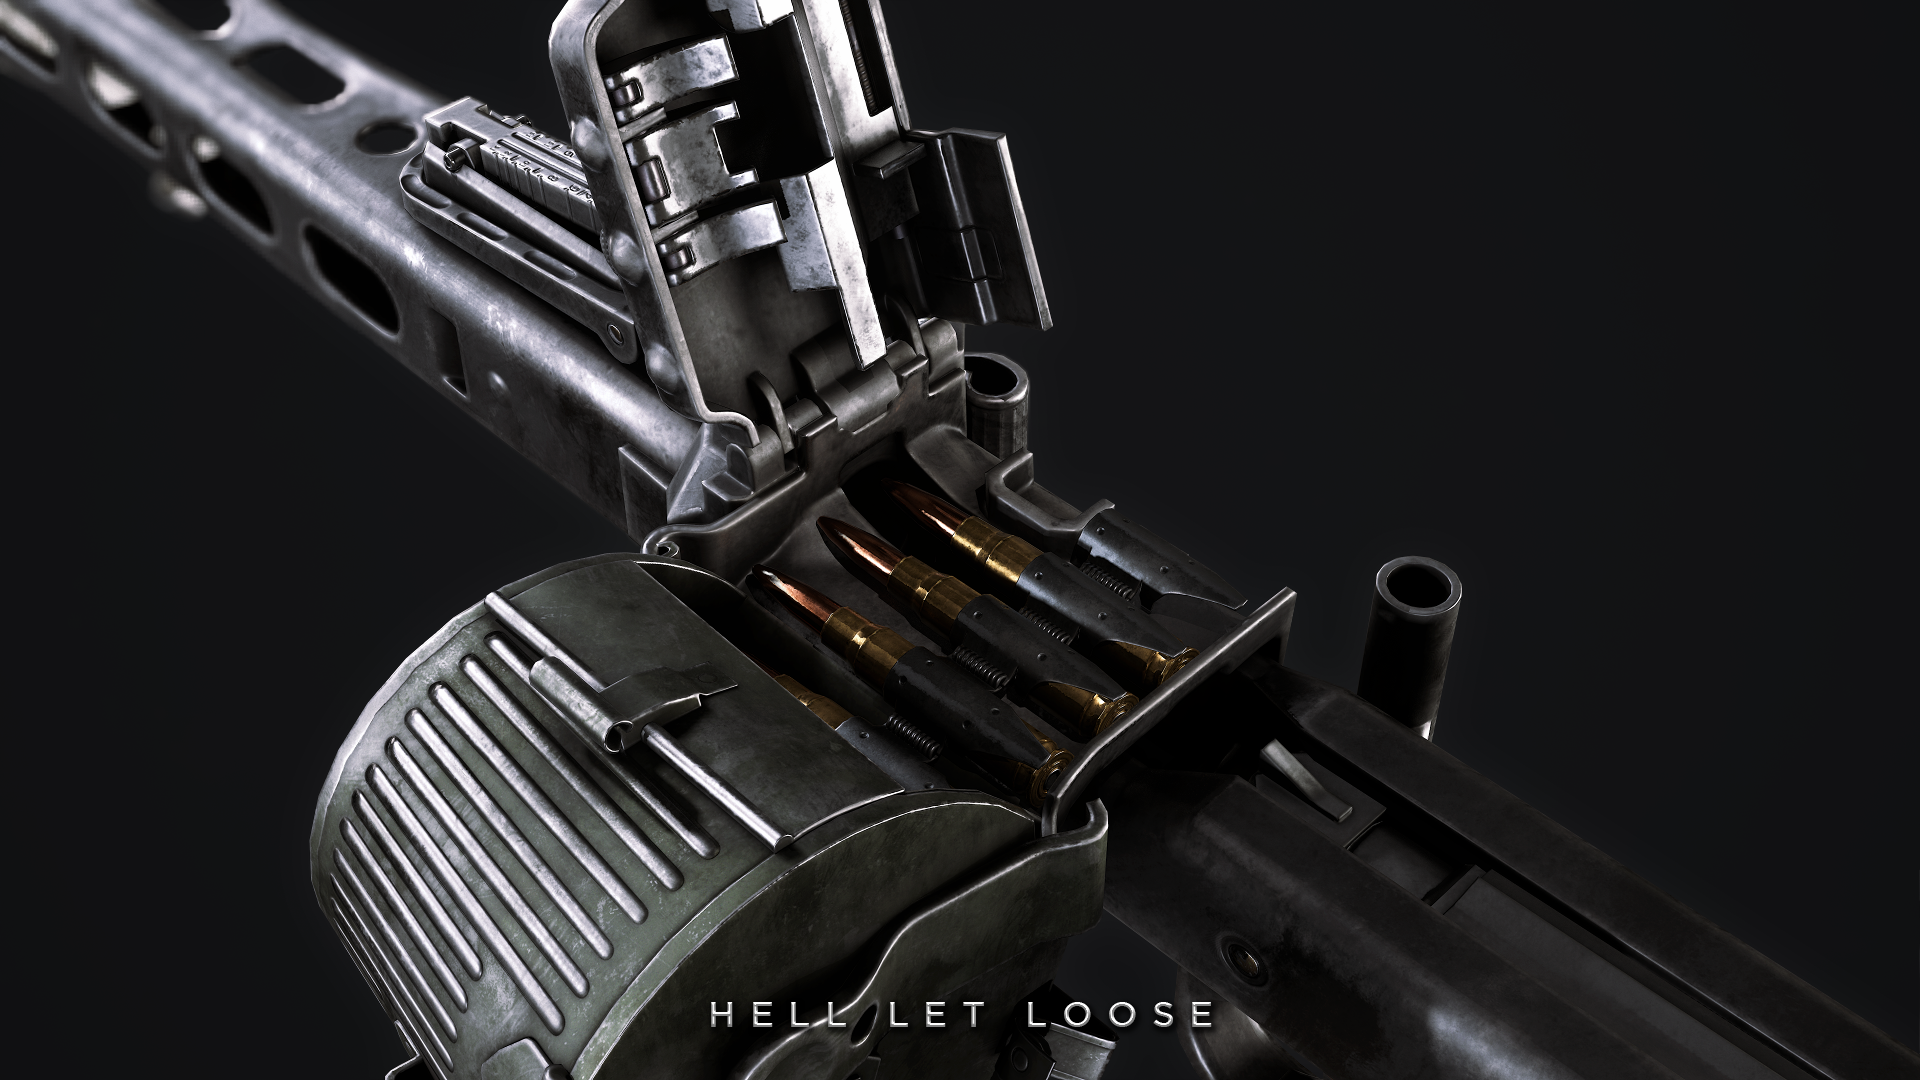 Hell Let Loose Mg42